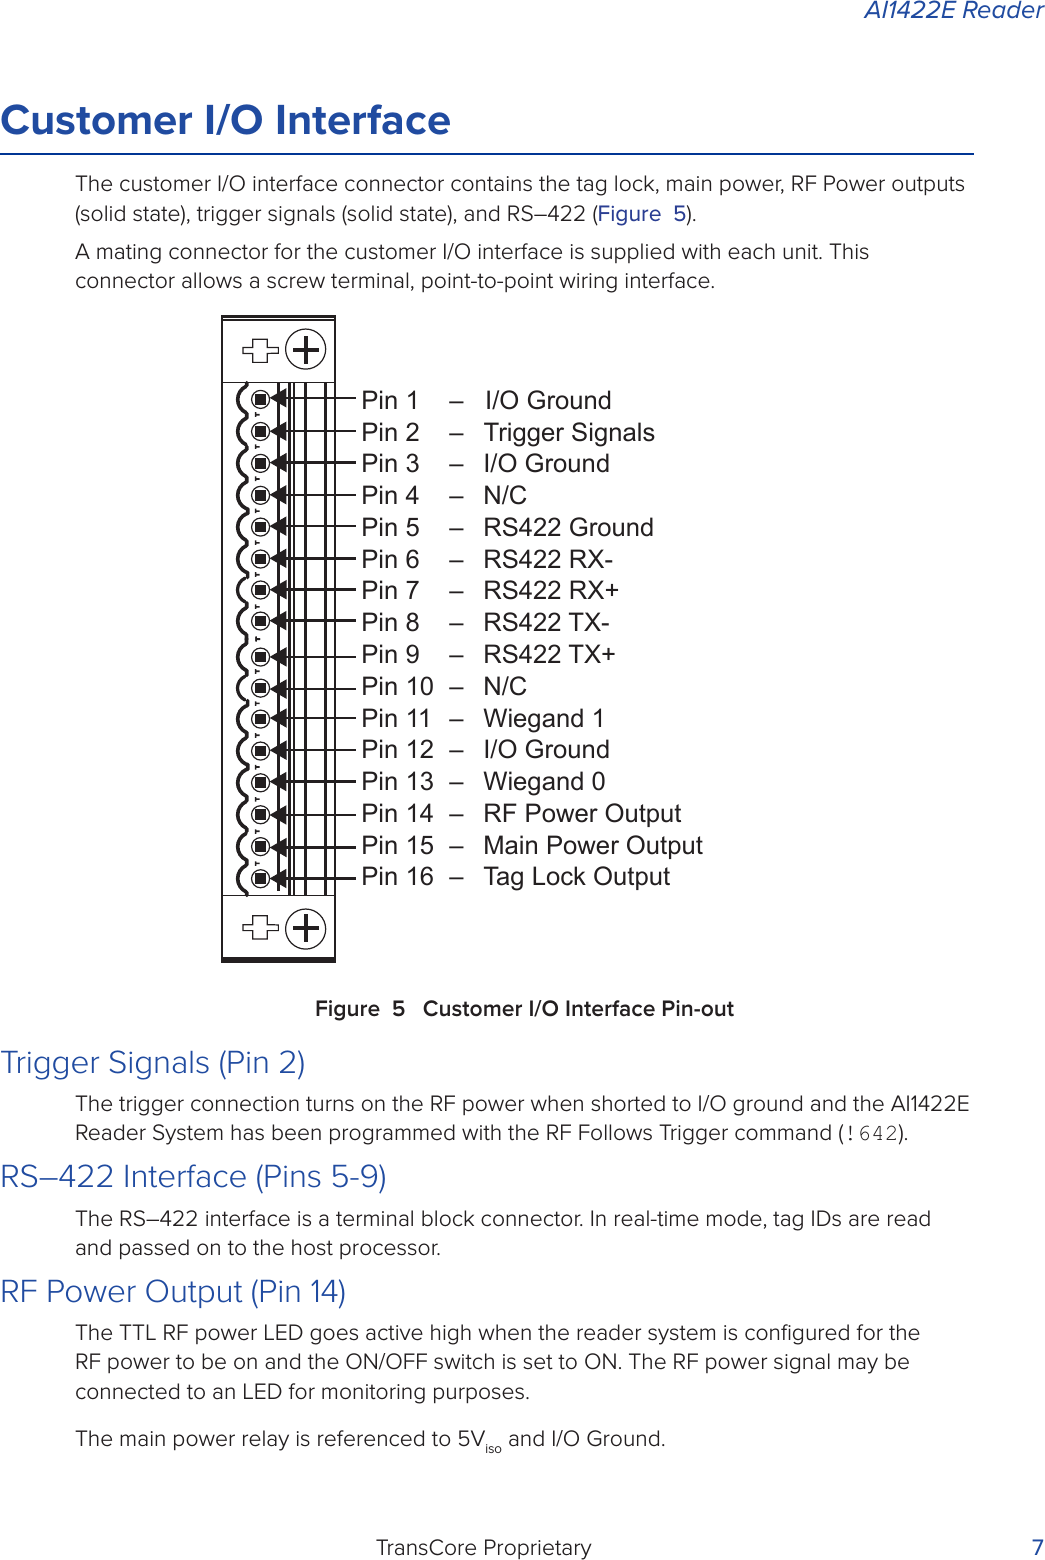 AI1422E ReaderTransCore Proprietary 7Customer I/O InterfaceThe customer I/O interface connector contains the tag lock, main power, RF Power outputs (solid state), trigger signals (solid state), and RS–422 (Figure 5). A mating connector for the customer I/O interface is supplied with each unit. This connector allows a screw terminal, point-to-point wiring interface. Figure 5  Customer I/O Interface Pin-out Trigger Signals (Pin 2)The trigger connection turns on the RF power when shorted to I/O ground and the AI1422E Reader System has been programmed with the RF Follows Trigger command (!642).RS–422 Interface (Pins 5-9)The RS–422 interface is a terminal block connector. In real-time mode, tag IDs are read and passed on to the host processor.RF Power Output (Pin 14)The TTL RF power LED goes active high when the reader system is conﬁgured for the RF power to be on and the ON/OFF switch is set to ON. The RF power signal may be connected to an LED for monitoring purposes.The main power relay is referenced to 5Viso and I/O Ground.Pin 1  –  I/O GroundPin 2  –  Trigger SignalsPin 3  –  I/O GroundPin 4  –  N/CPin 5  –  RS422 GroundPin 6  –  RS422 RX-Pin 7  –  RS422 RX+Pin 8  –  RS422 TX-Pin 9  –  RS422 TX+Pin 10  –  N/CPin 11  –  Wiegand 1Pin 12  –  I/O GroundPin 13  –  Wiegand 0Pin 14  –  RF Power OutputPin 15  –  Main Power OutputPin 16  –  Tag Lock Output